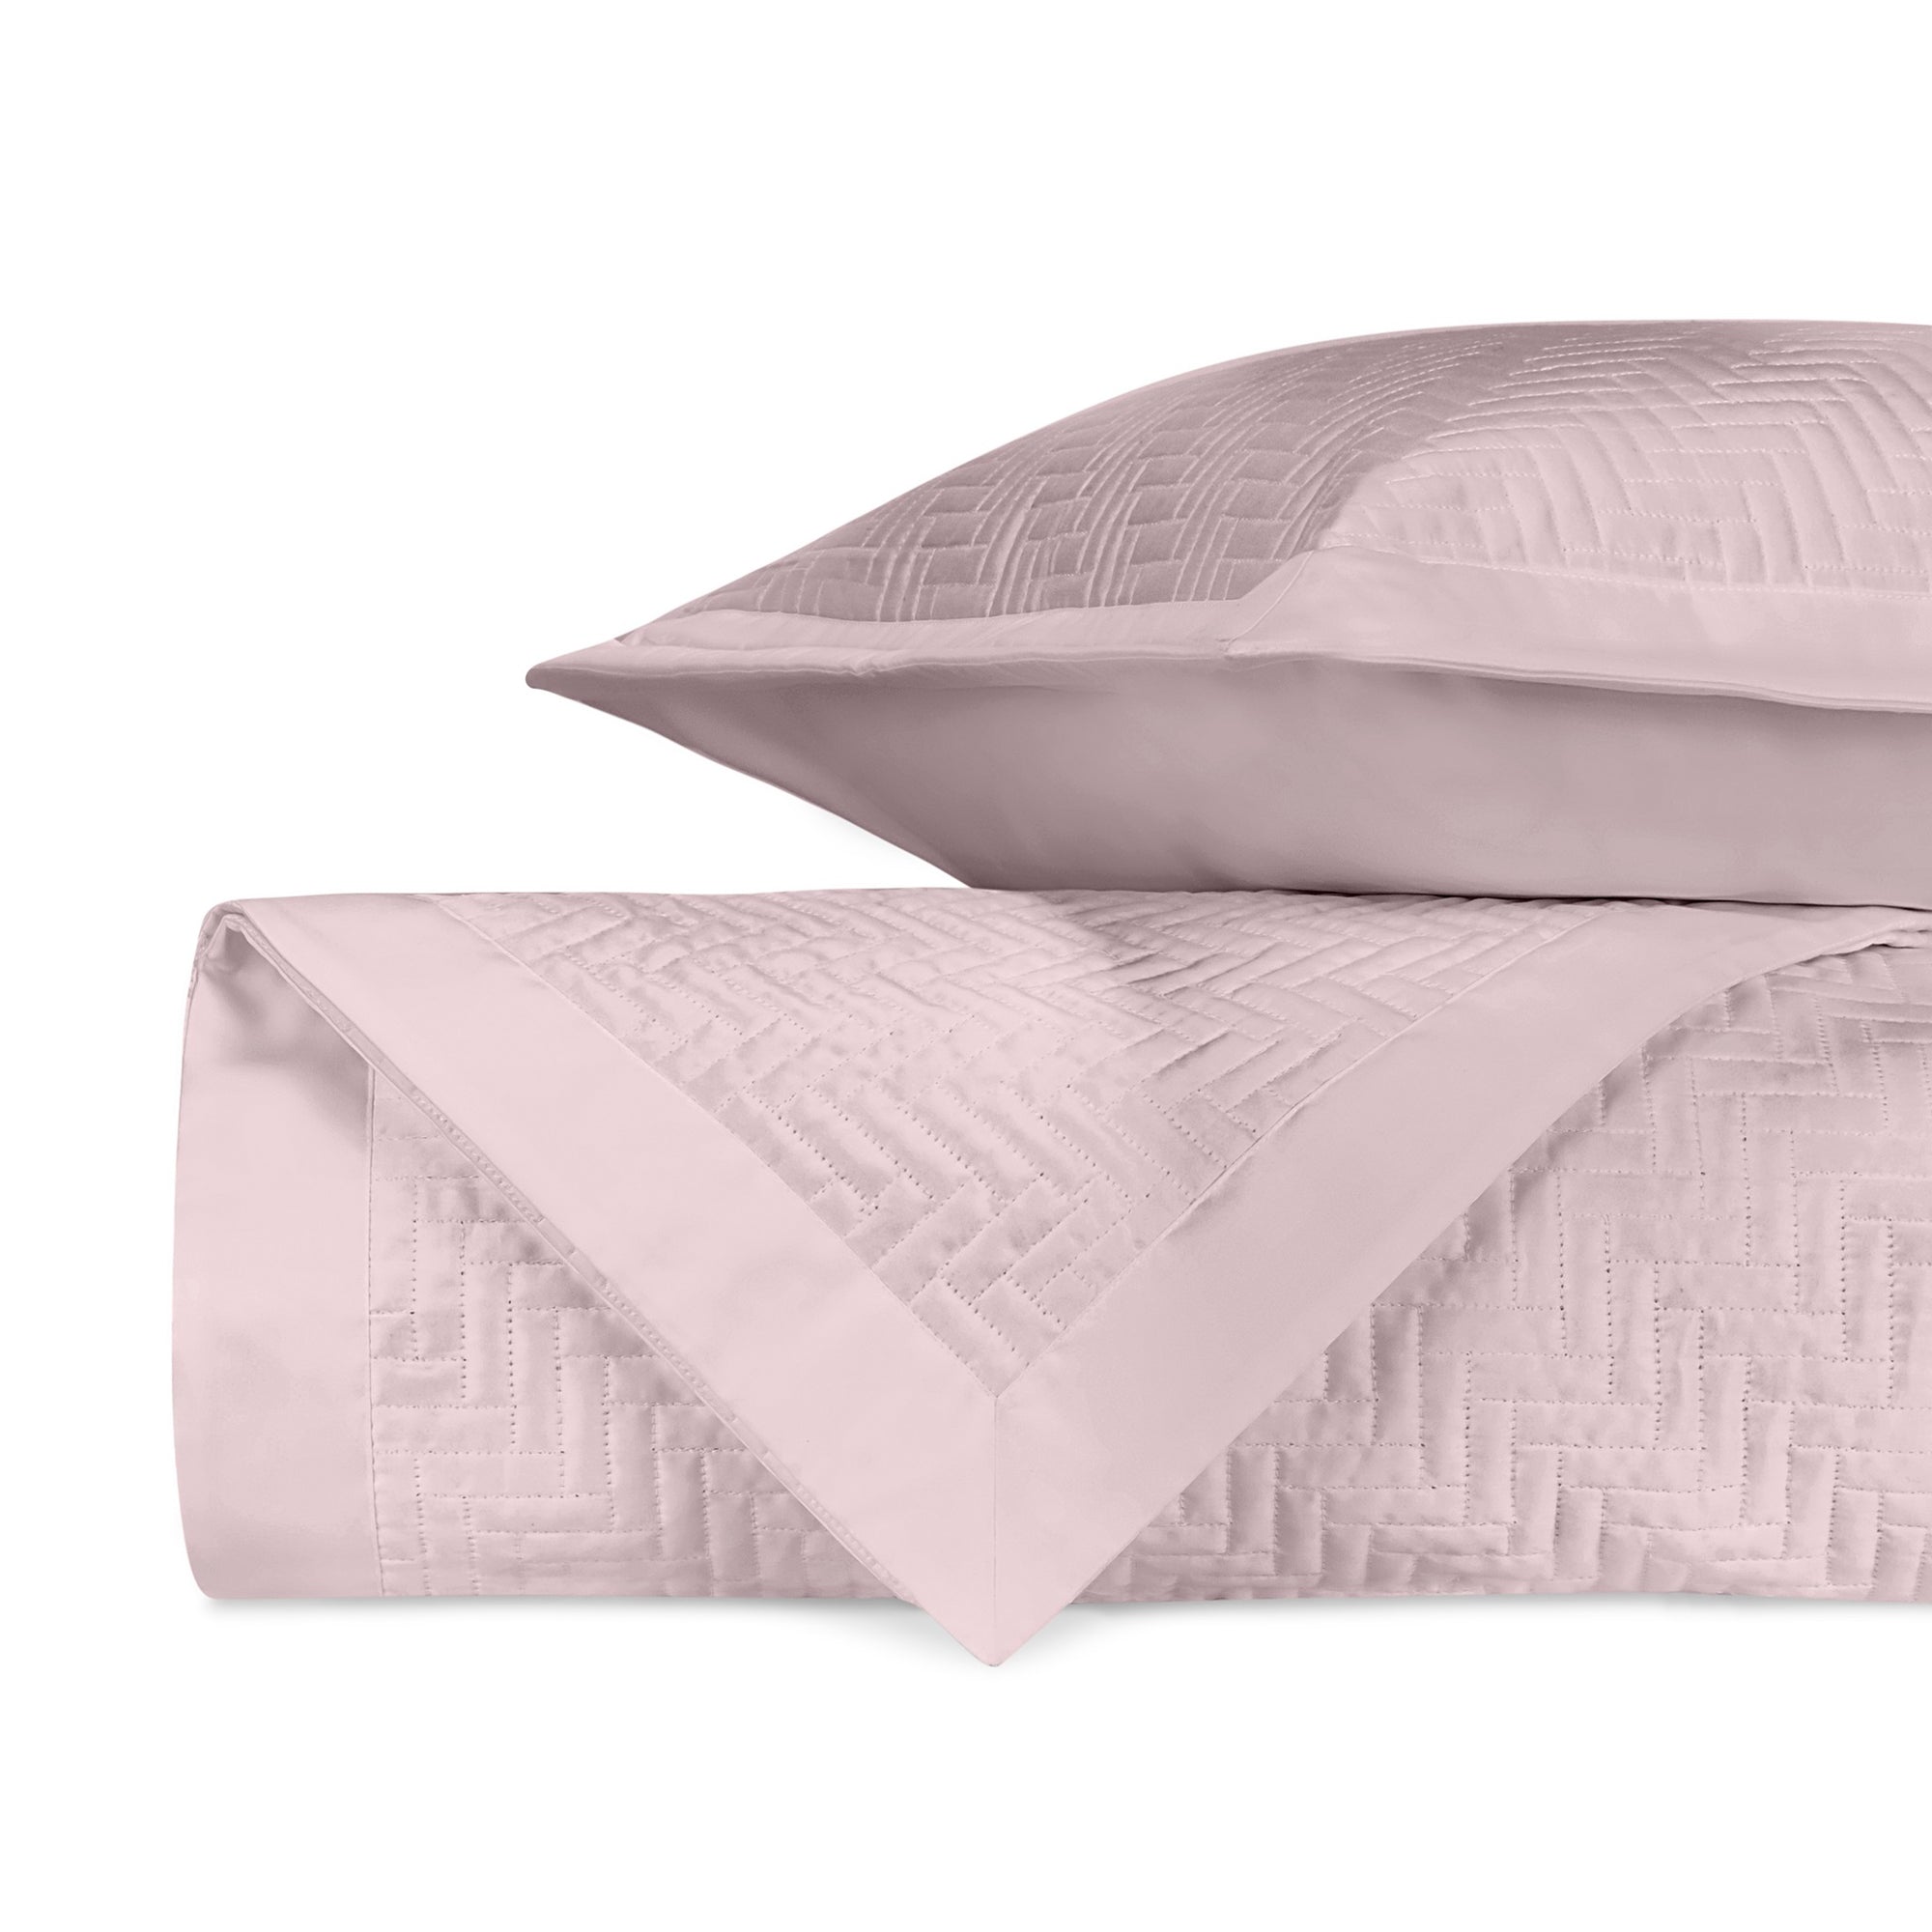 Stack Image of Home Treasures Baxter Royal Sateen Quilted Bedding in Color Incenso Lavender